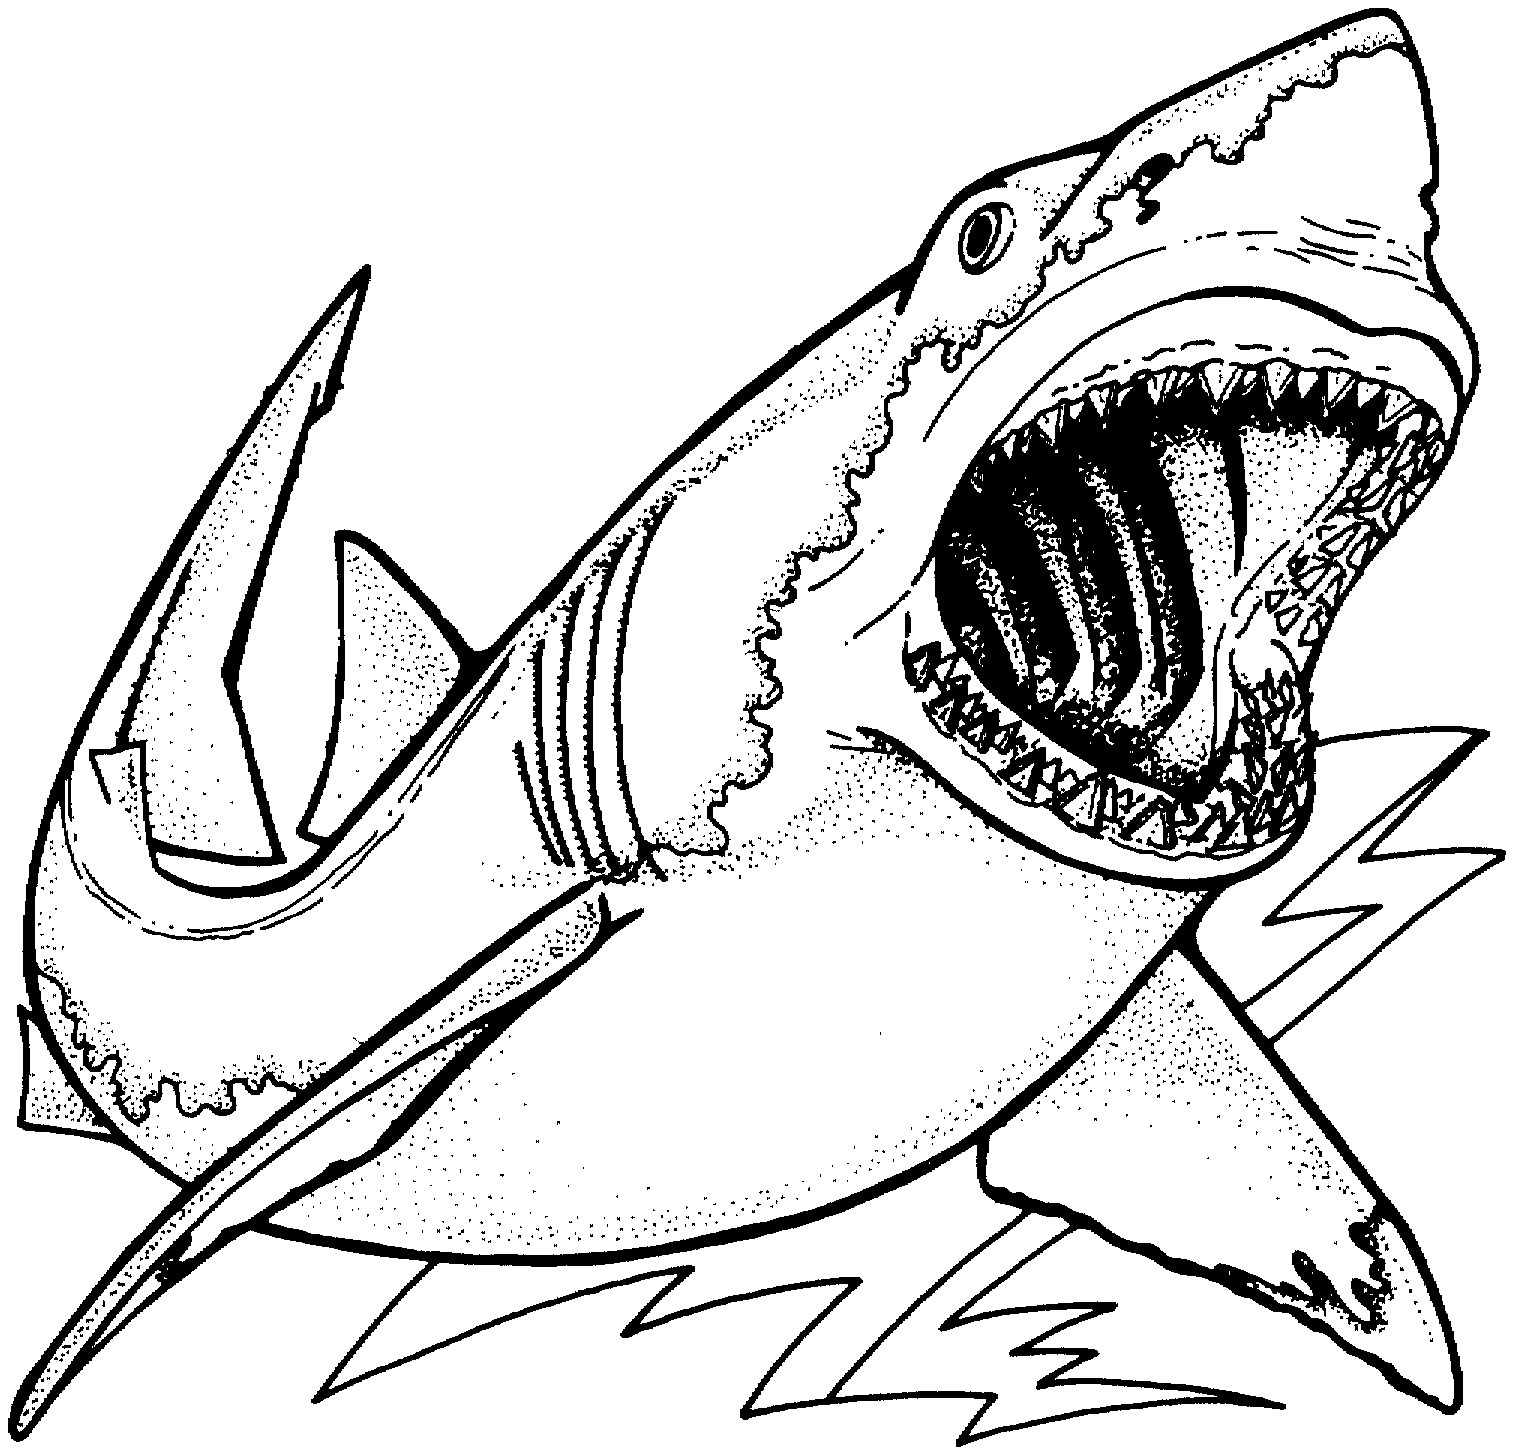 Free Shark Coloring Pages. with pilot fishes printable. printable ...